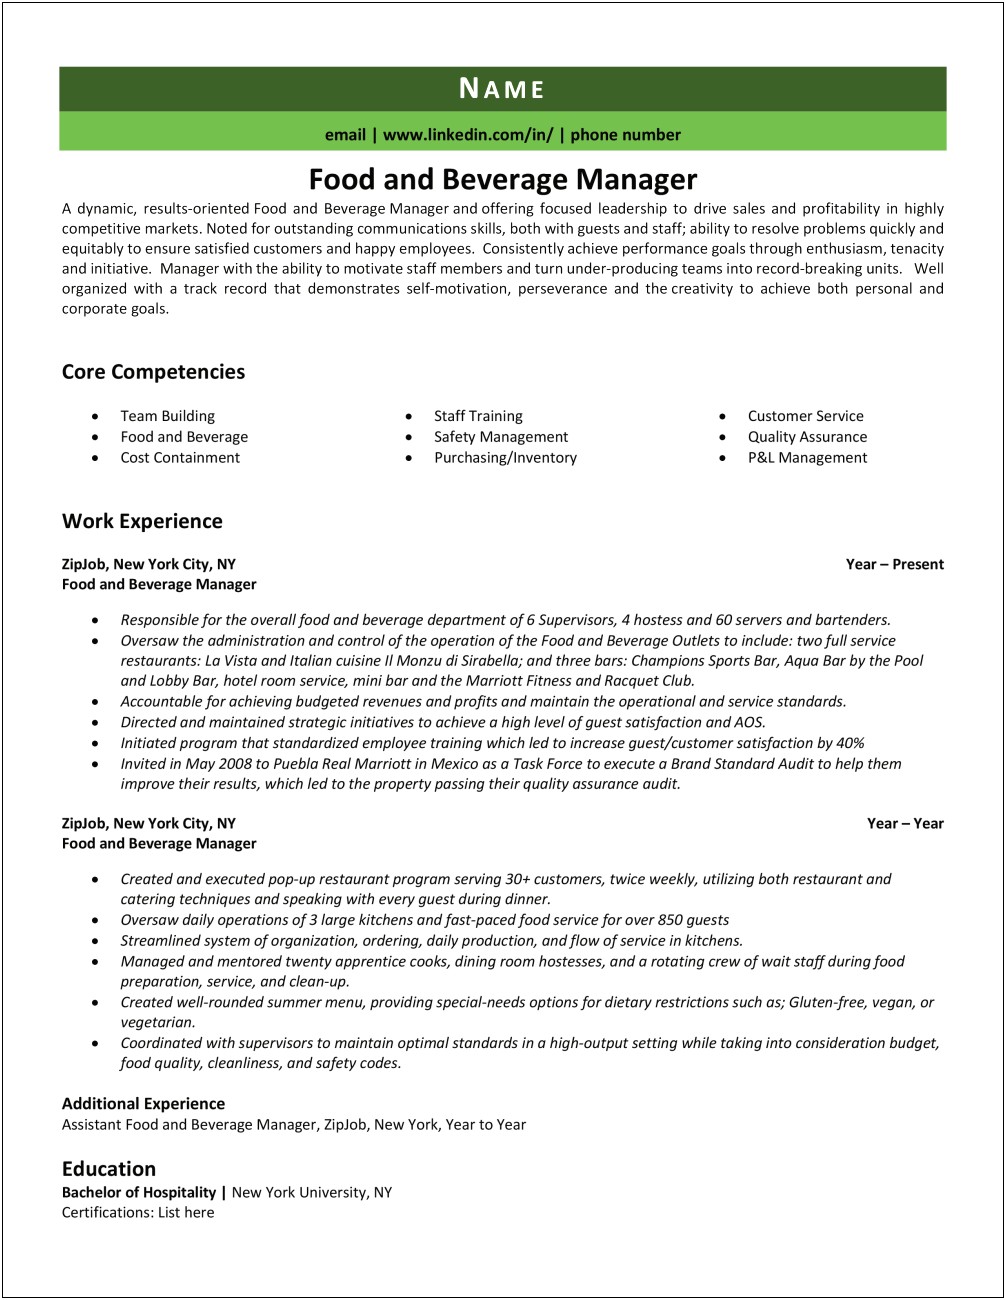 Example Resume For Food Service Manager